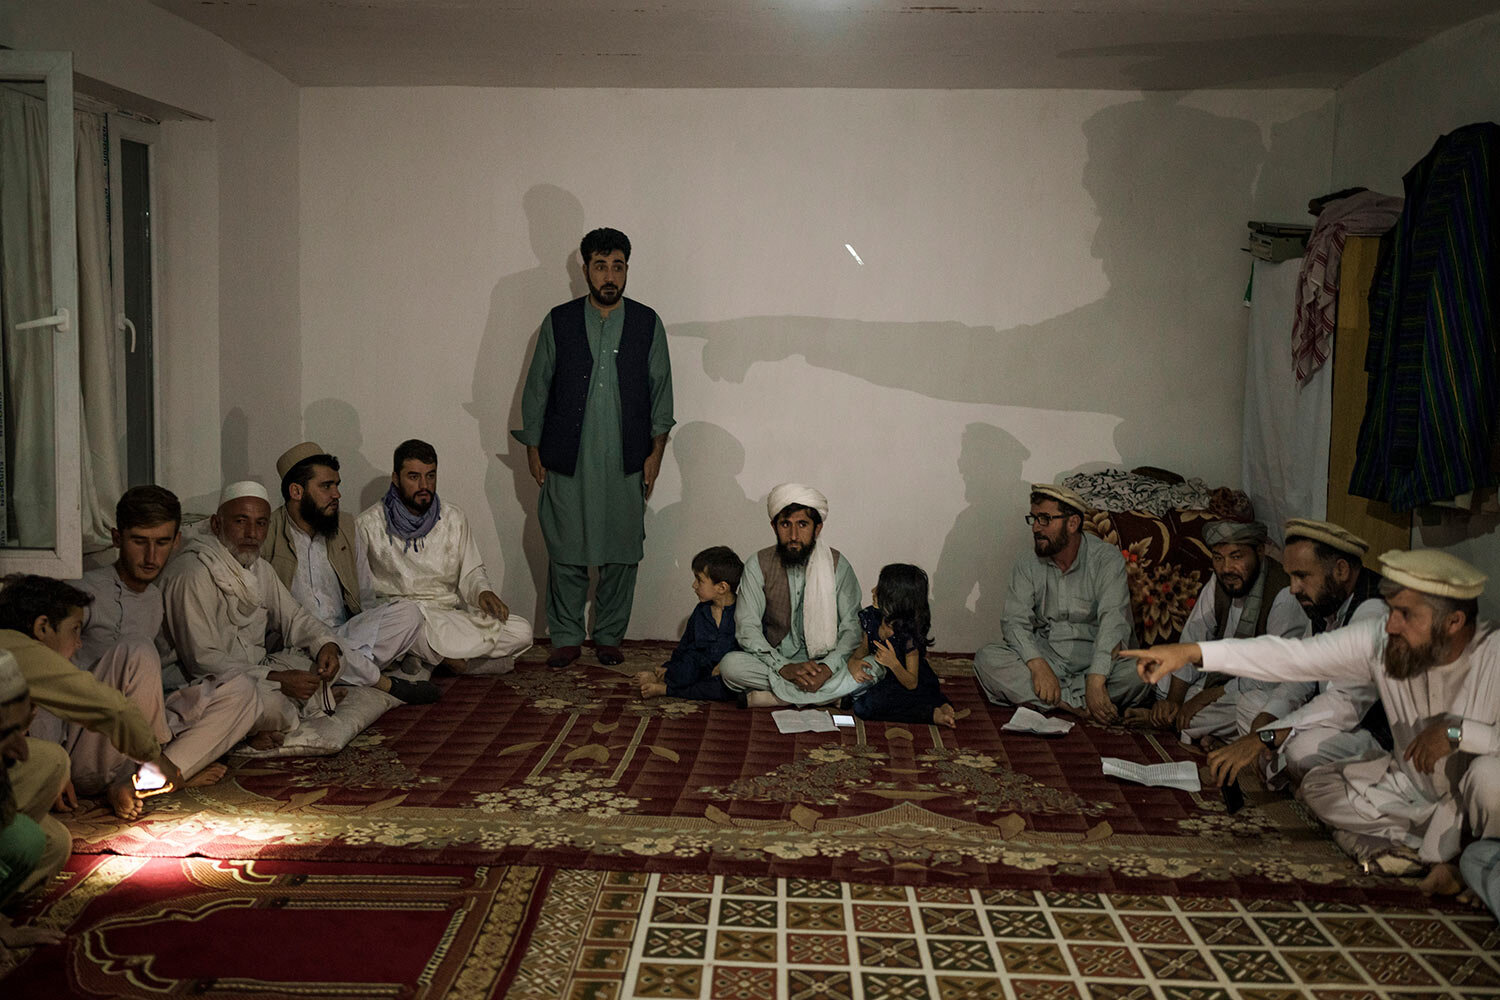  Muhammad Jawid, the father of a man accused of stabbing a neighbor, stands inside a room where a committee of local elders judge the incident and determine the verdict, in Kabul, Afghanistan, Saturday, Oct. 2, 2021. Jawid’s son was declared guilt an